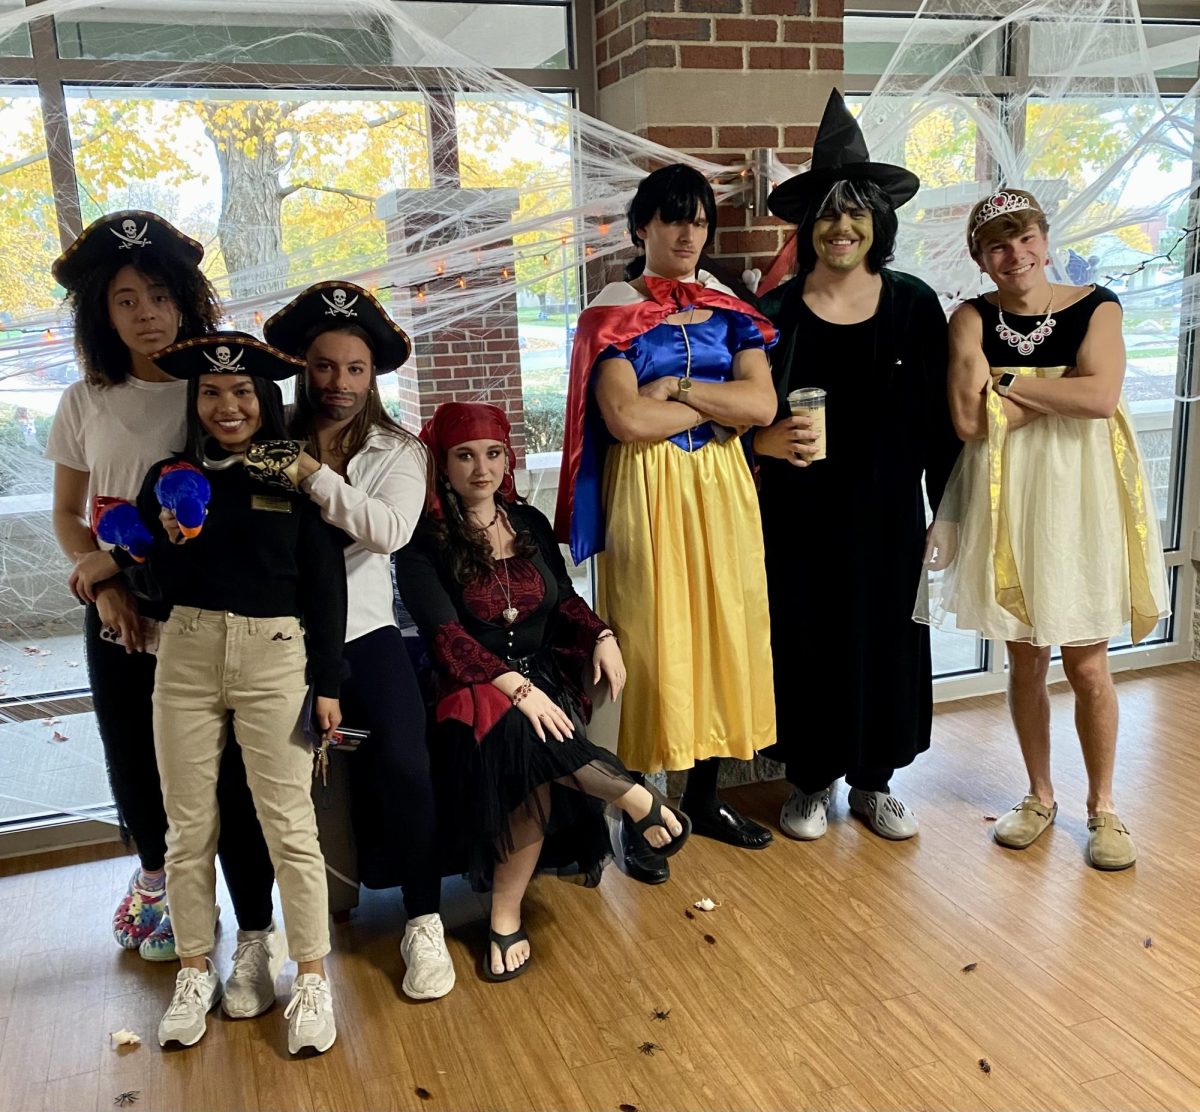 MU residents and children dressed up for the event